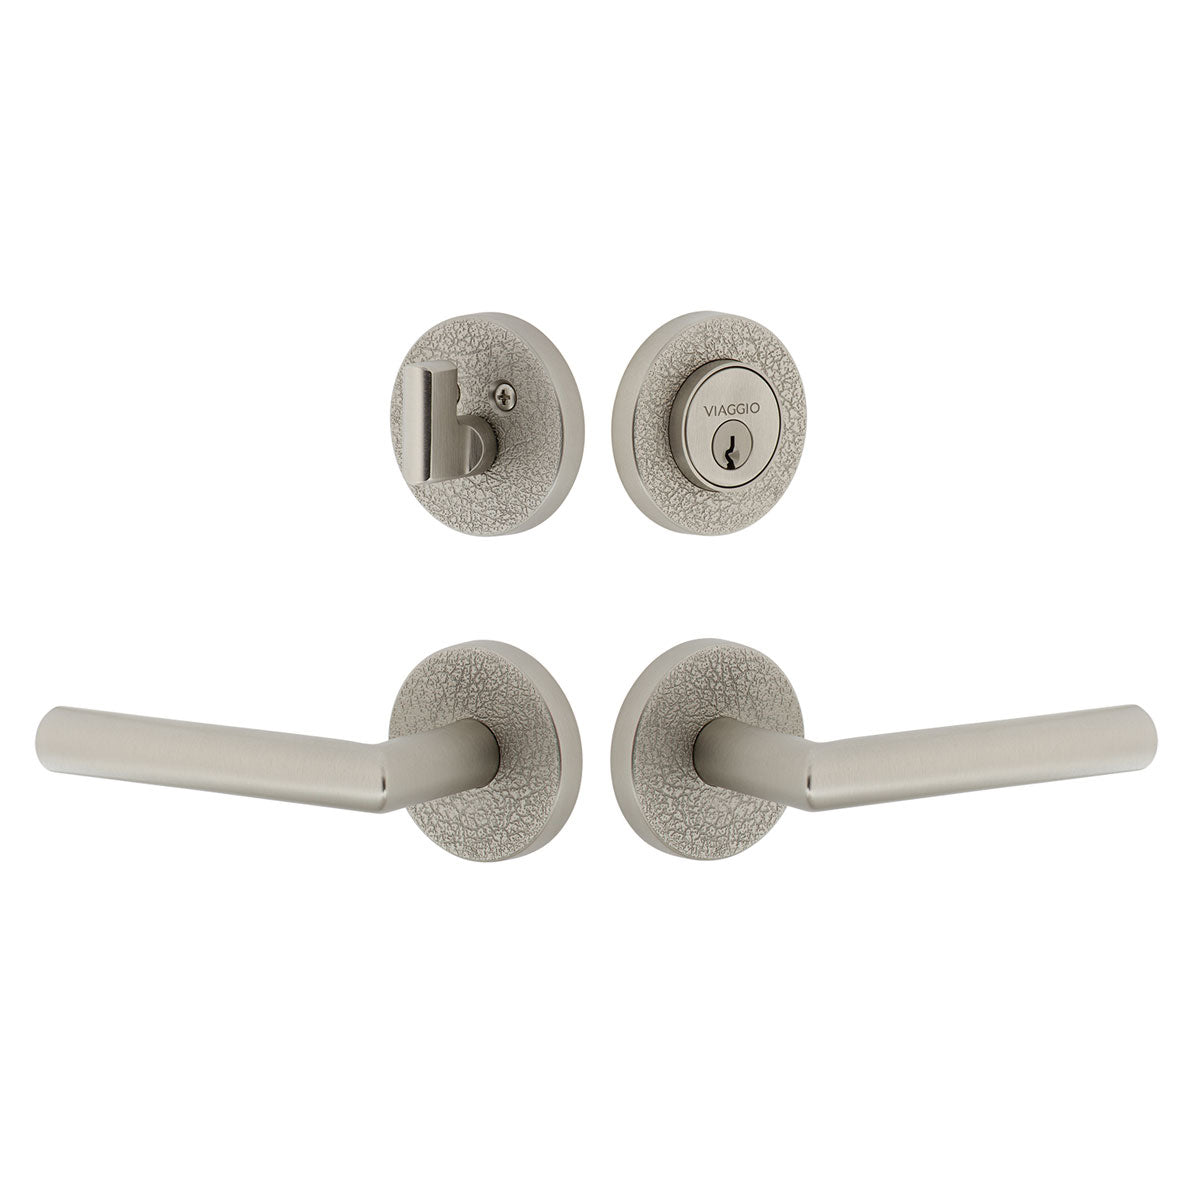 Circolo Leather Rosette Entry Set with Moderno Lever in Satin Nickel